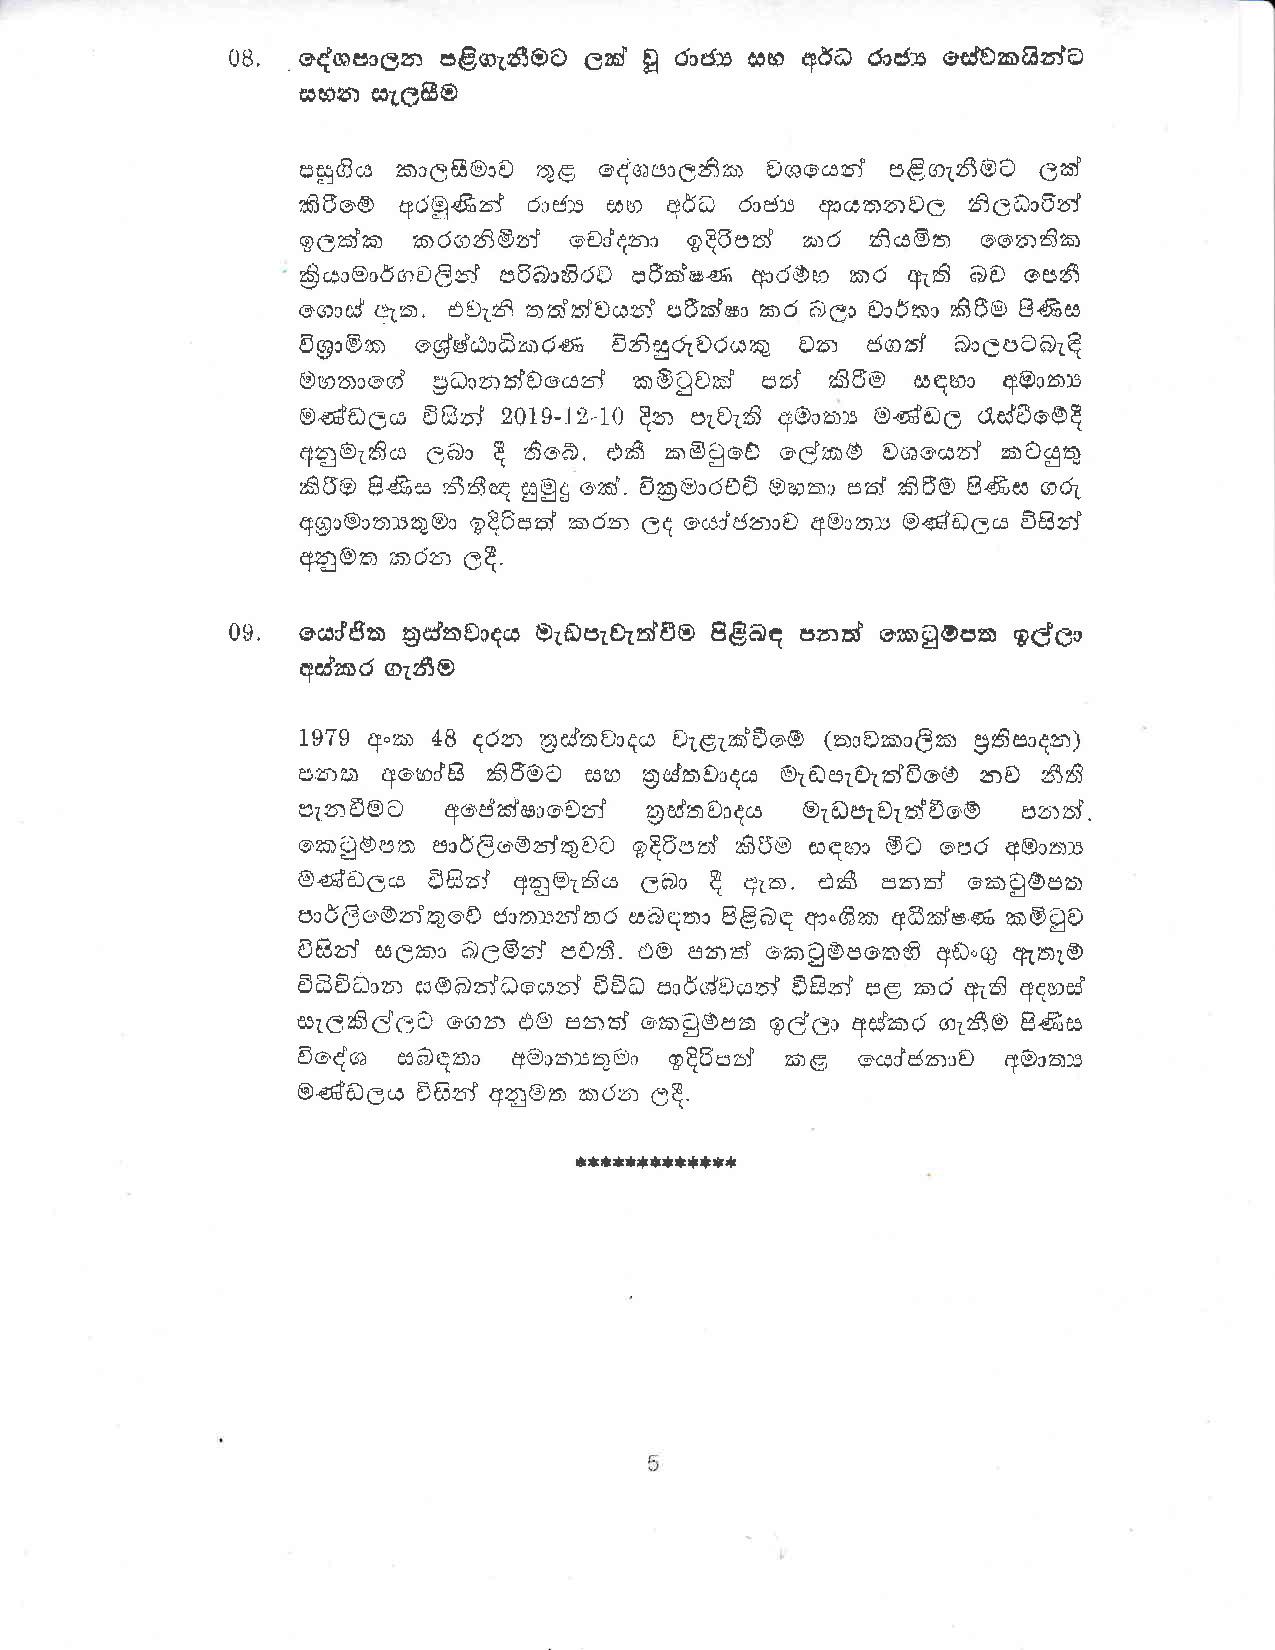 Cabinet Decision on 02.01.2020 1 page 005